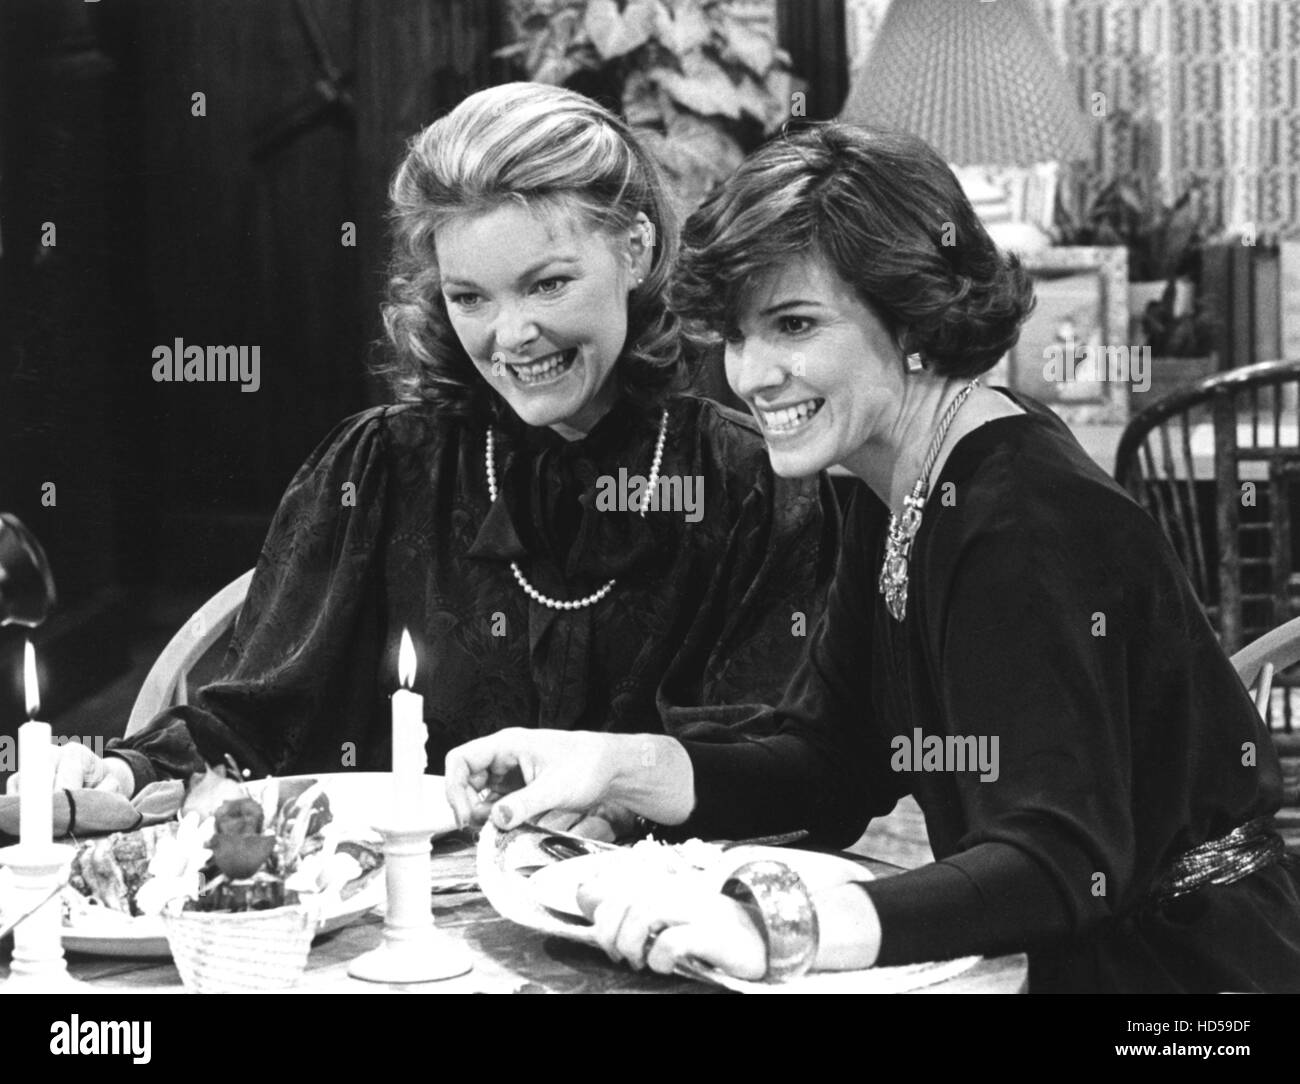 KATE & ALLIE, Jane Curtin, Susan Saint James in episode 'The Very Loud Family' aired 3/26/84, Season 1, 1984-89 Stock Photo